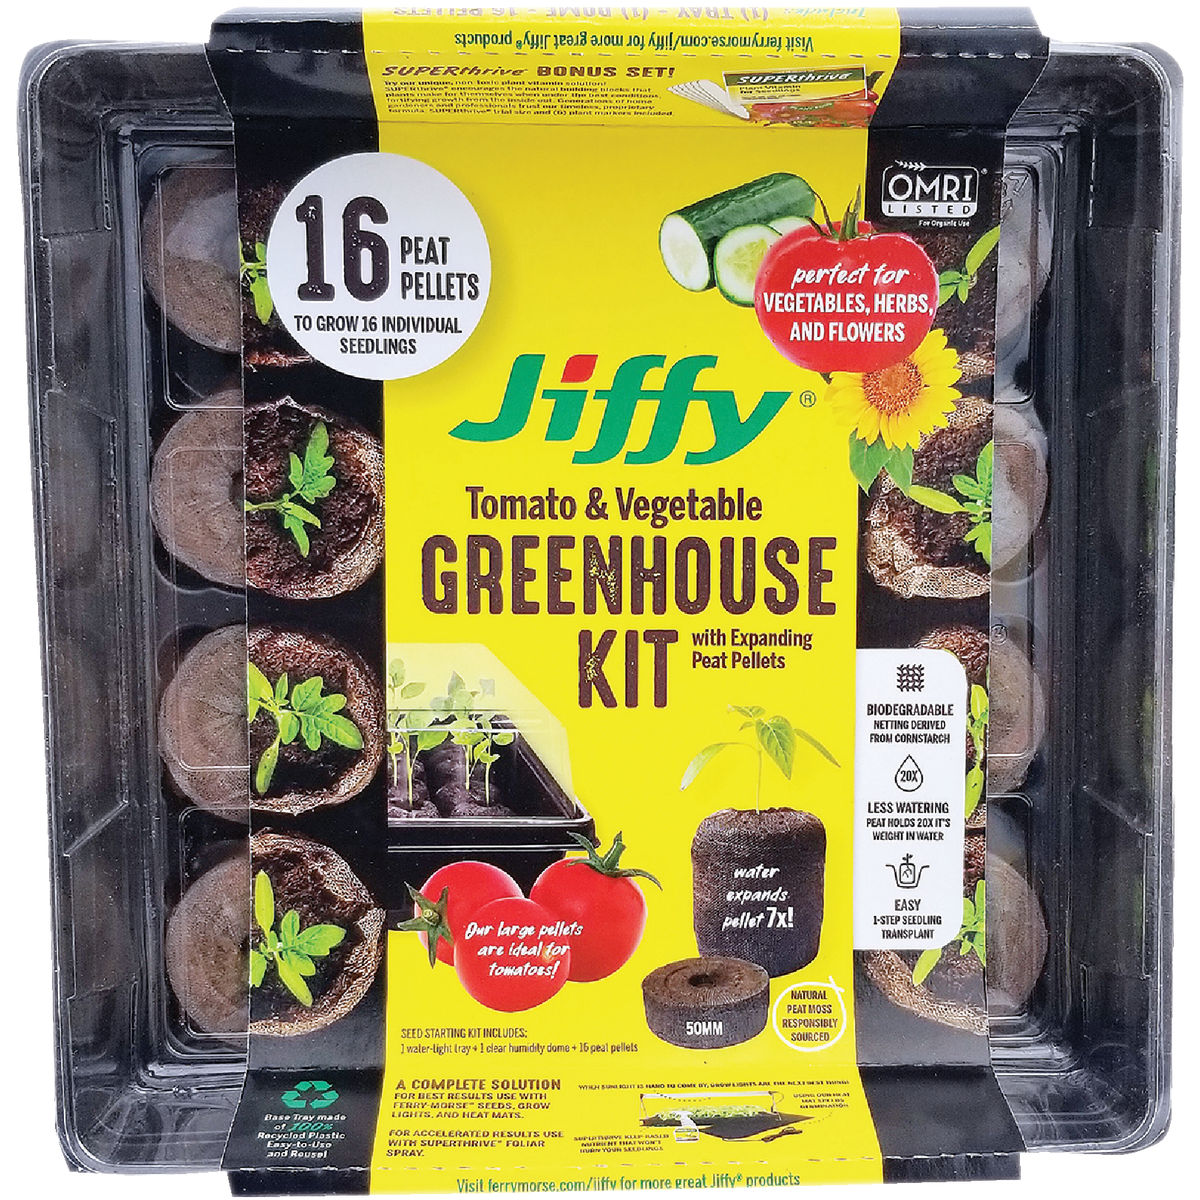 3 Very Useful Greenhouse Kit Ideas For Tiny Businesses